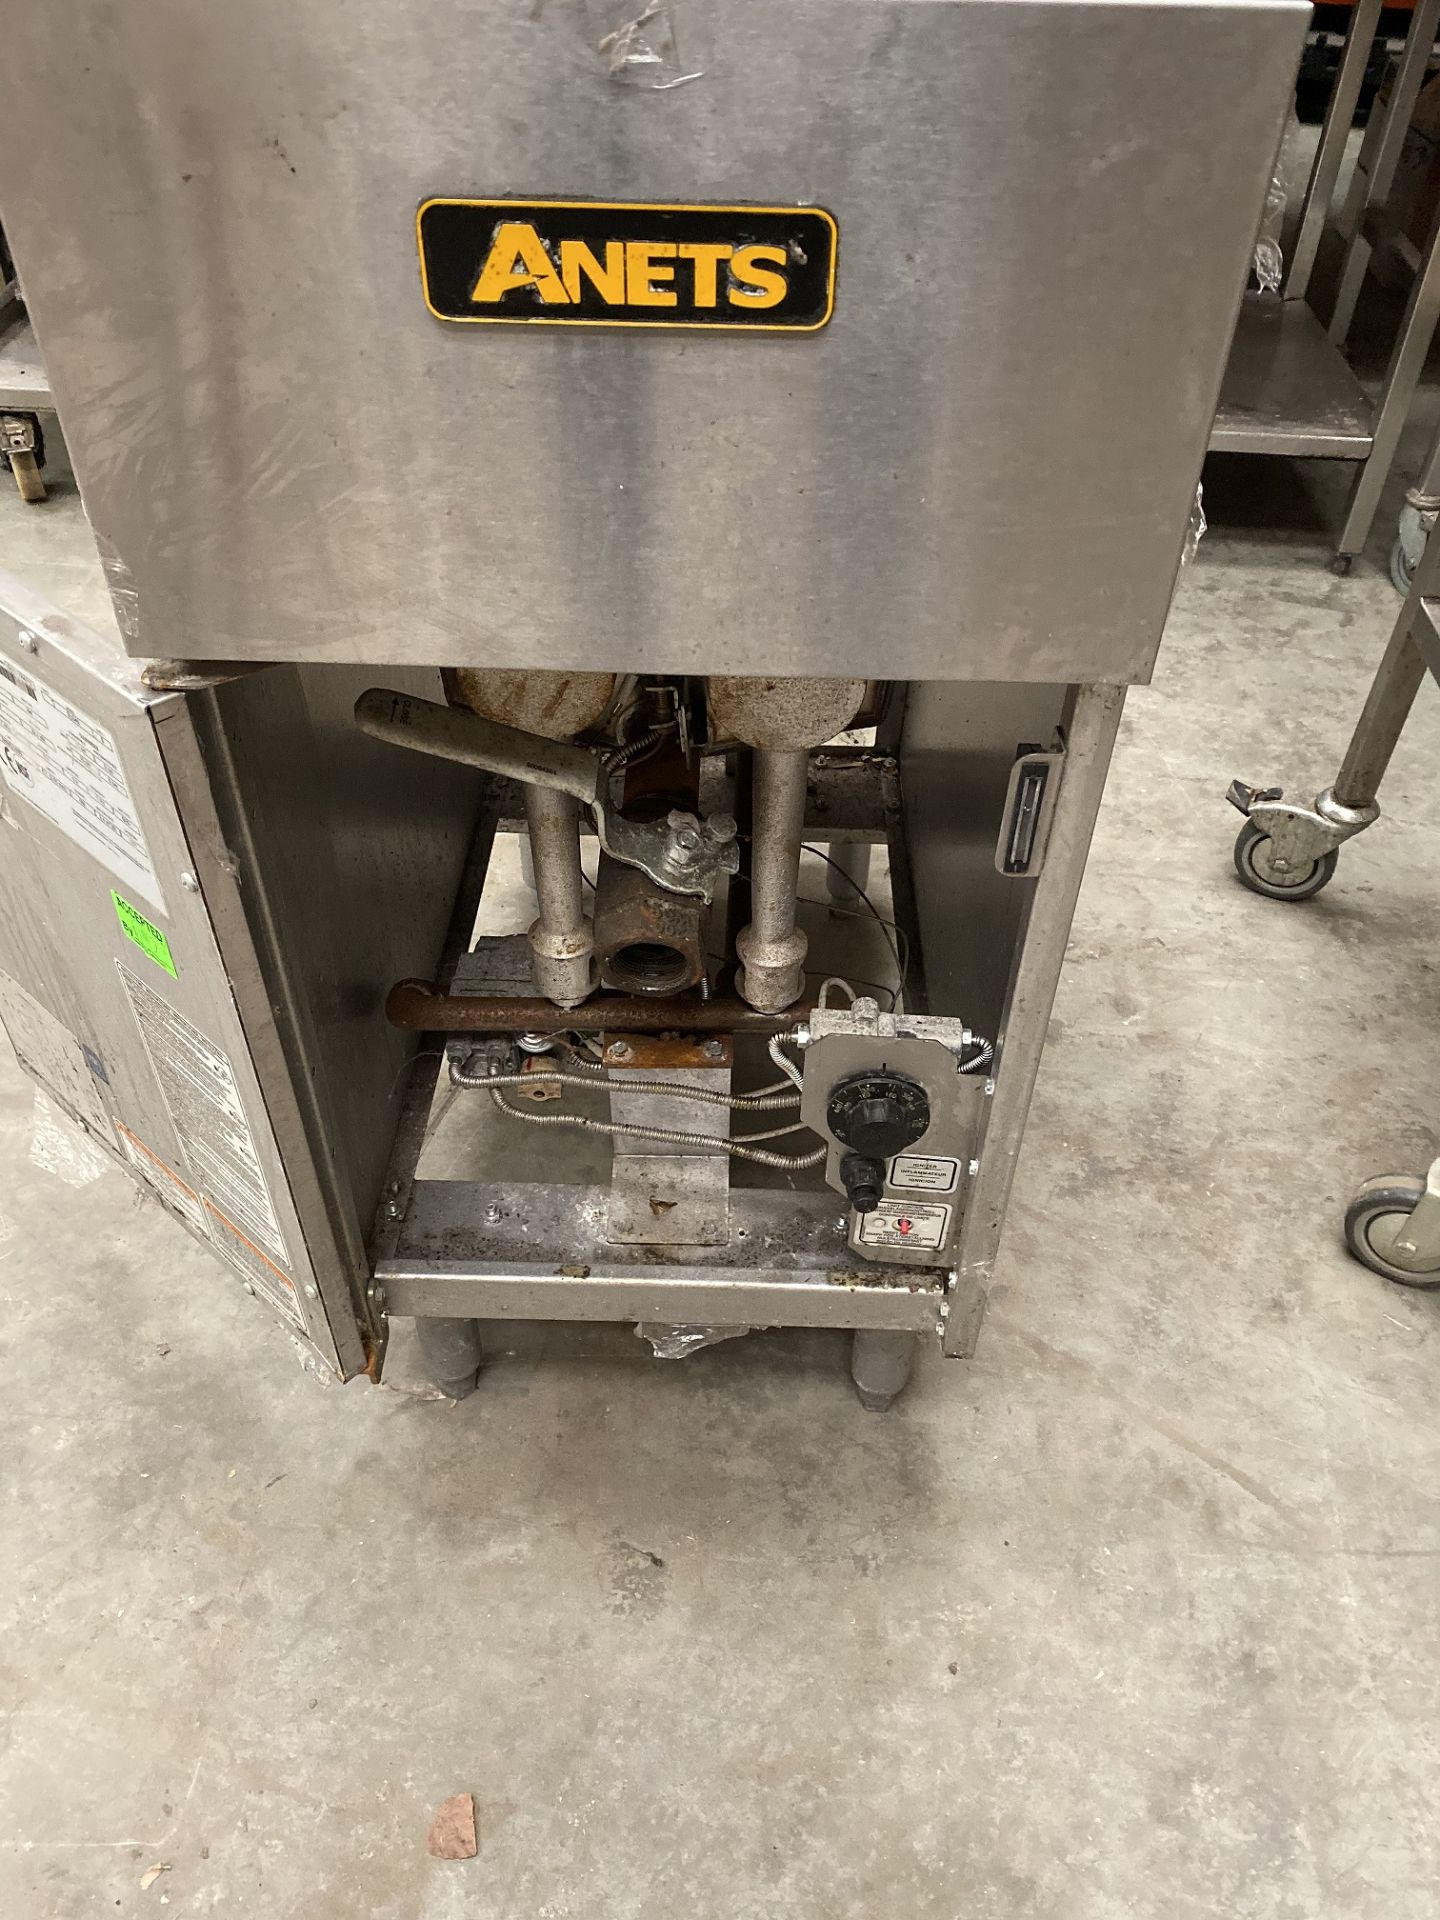 Anets Deep Fat Fryer - Image 2 of 3